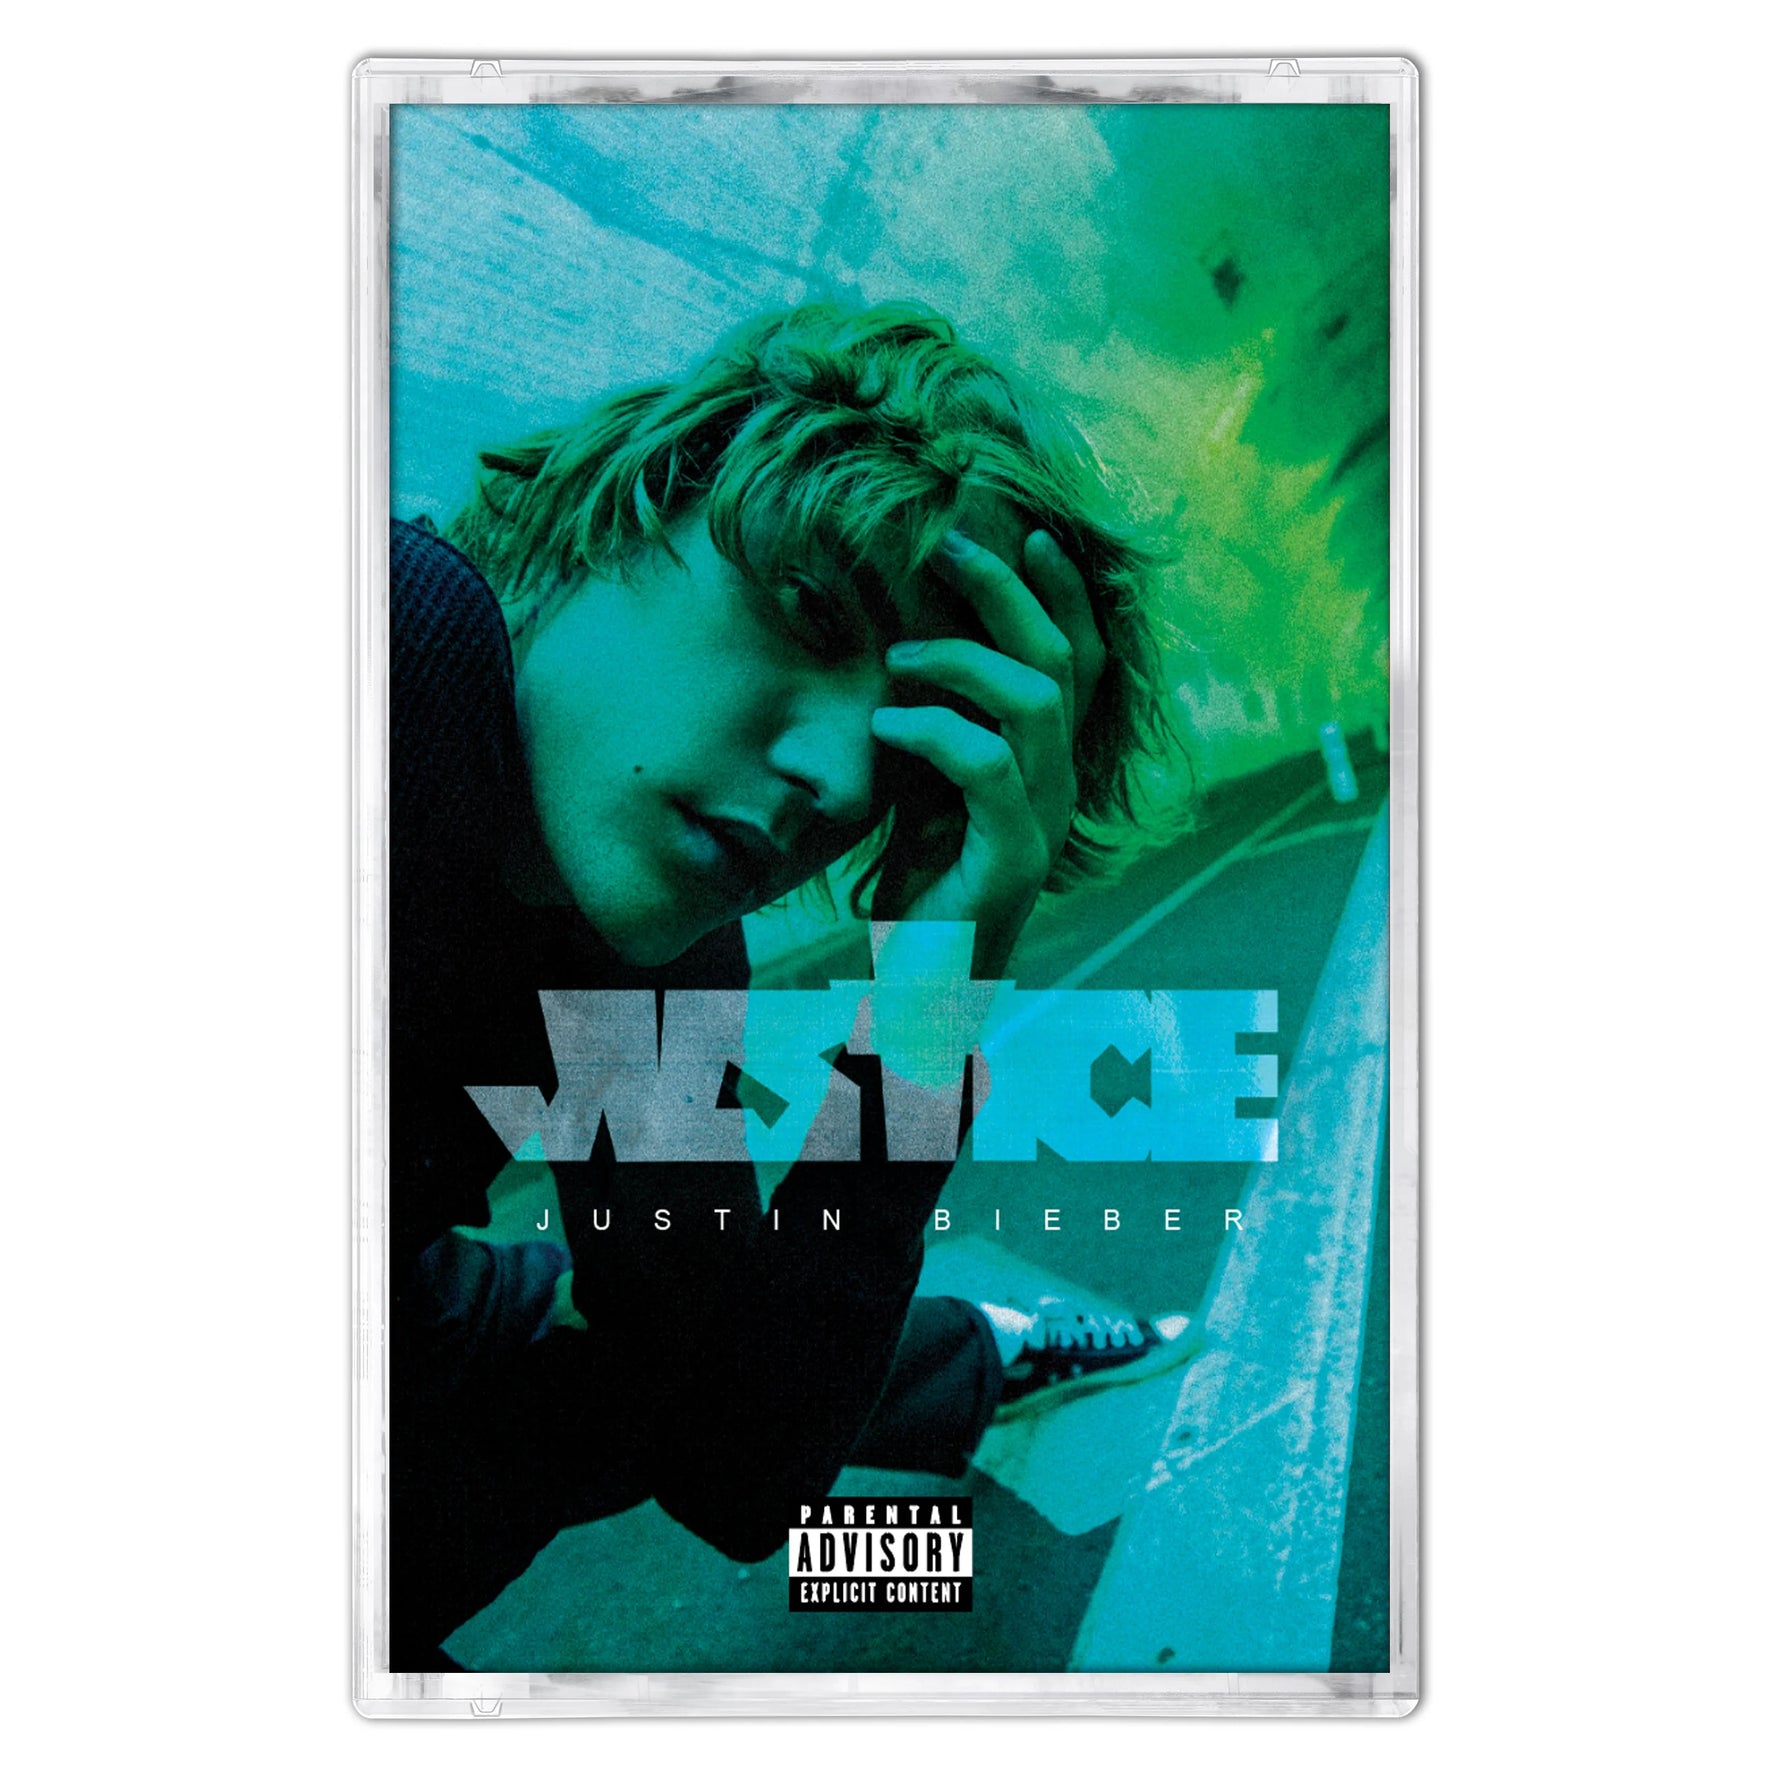 Justice (Store Exclusive Cassette #1)